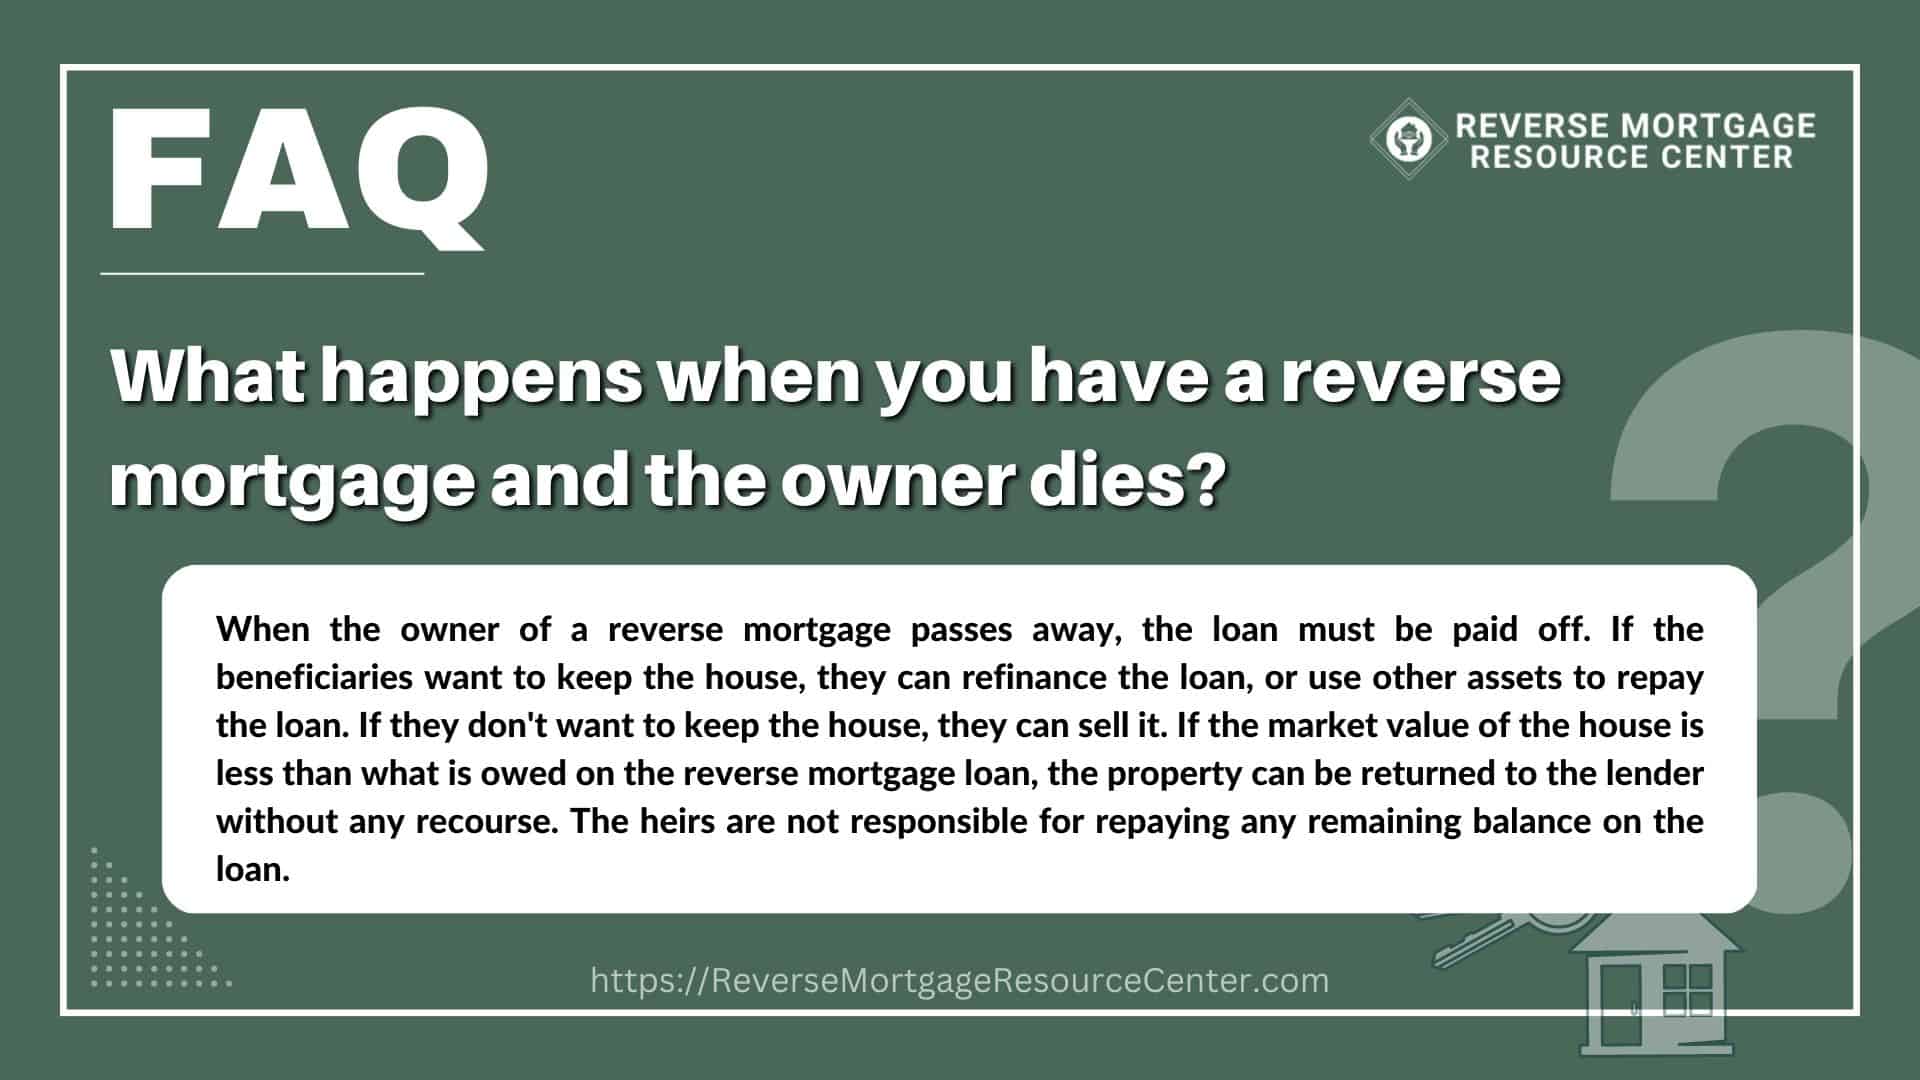 What happens when you have a reverse mortgage and the owner dies?